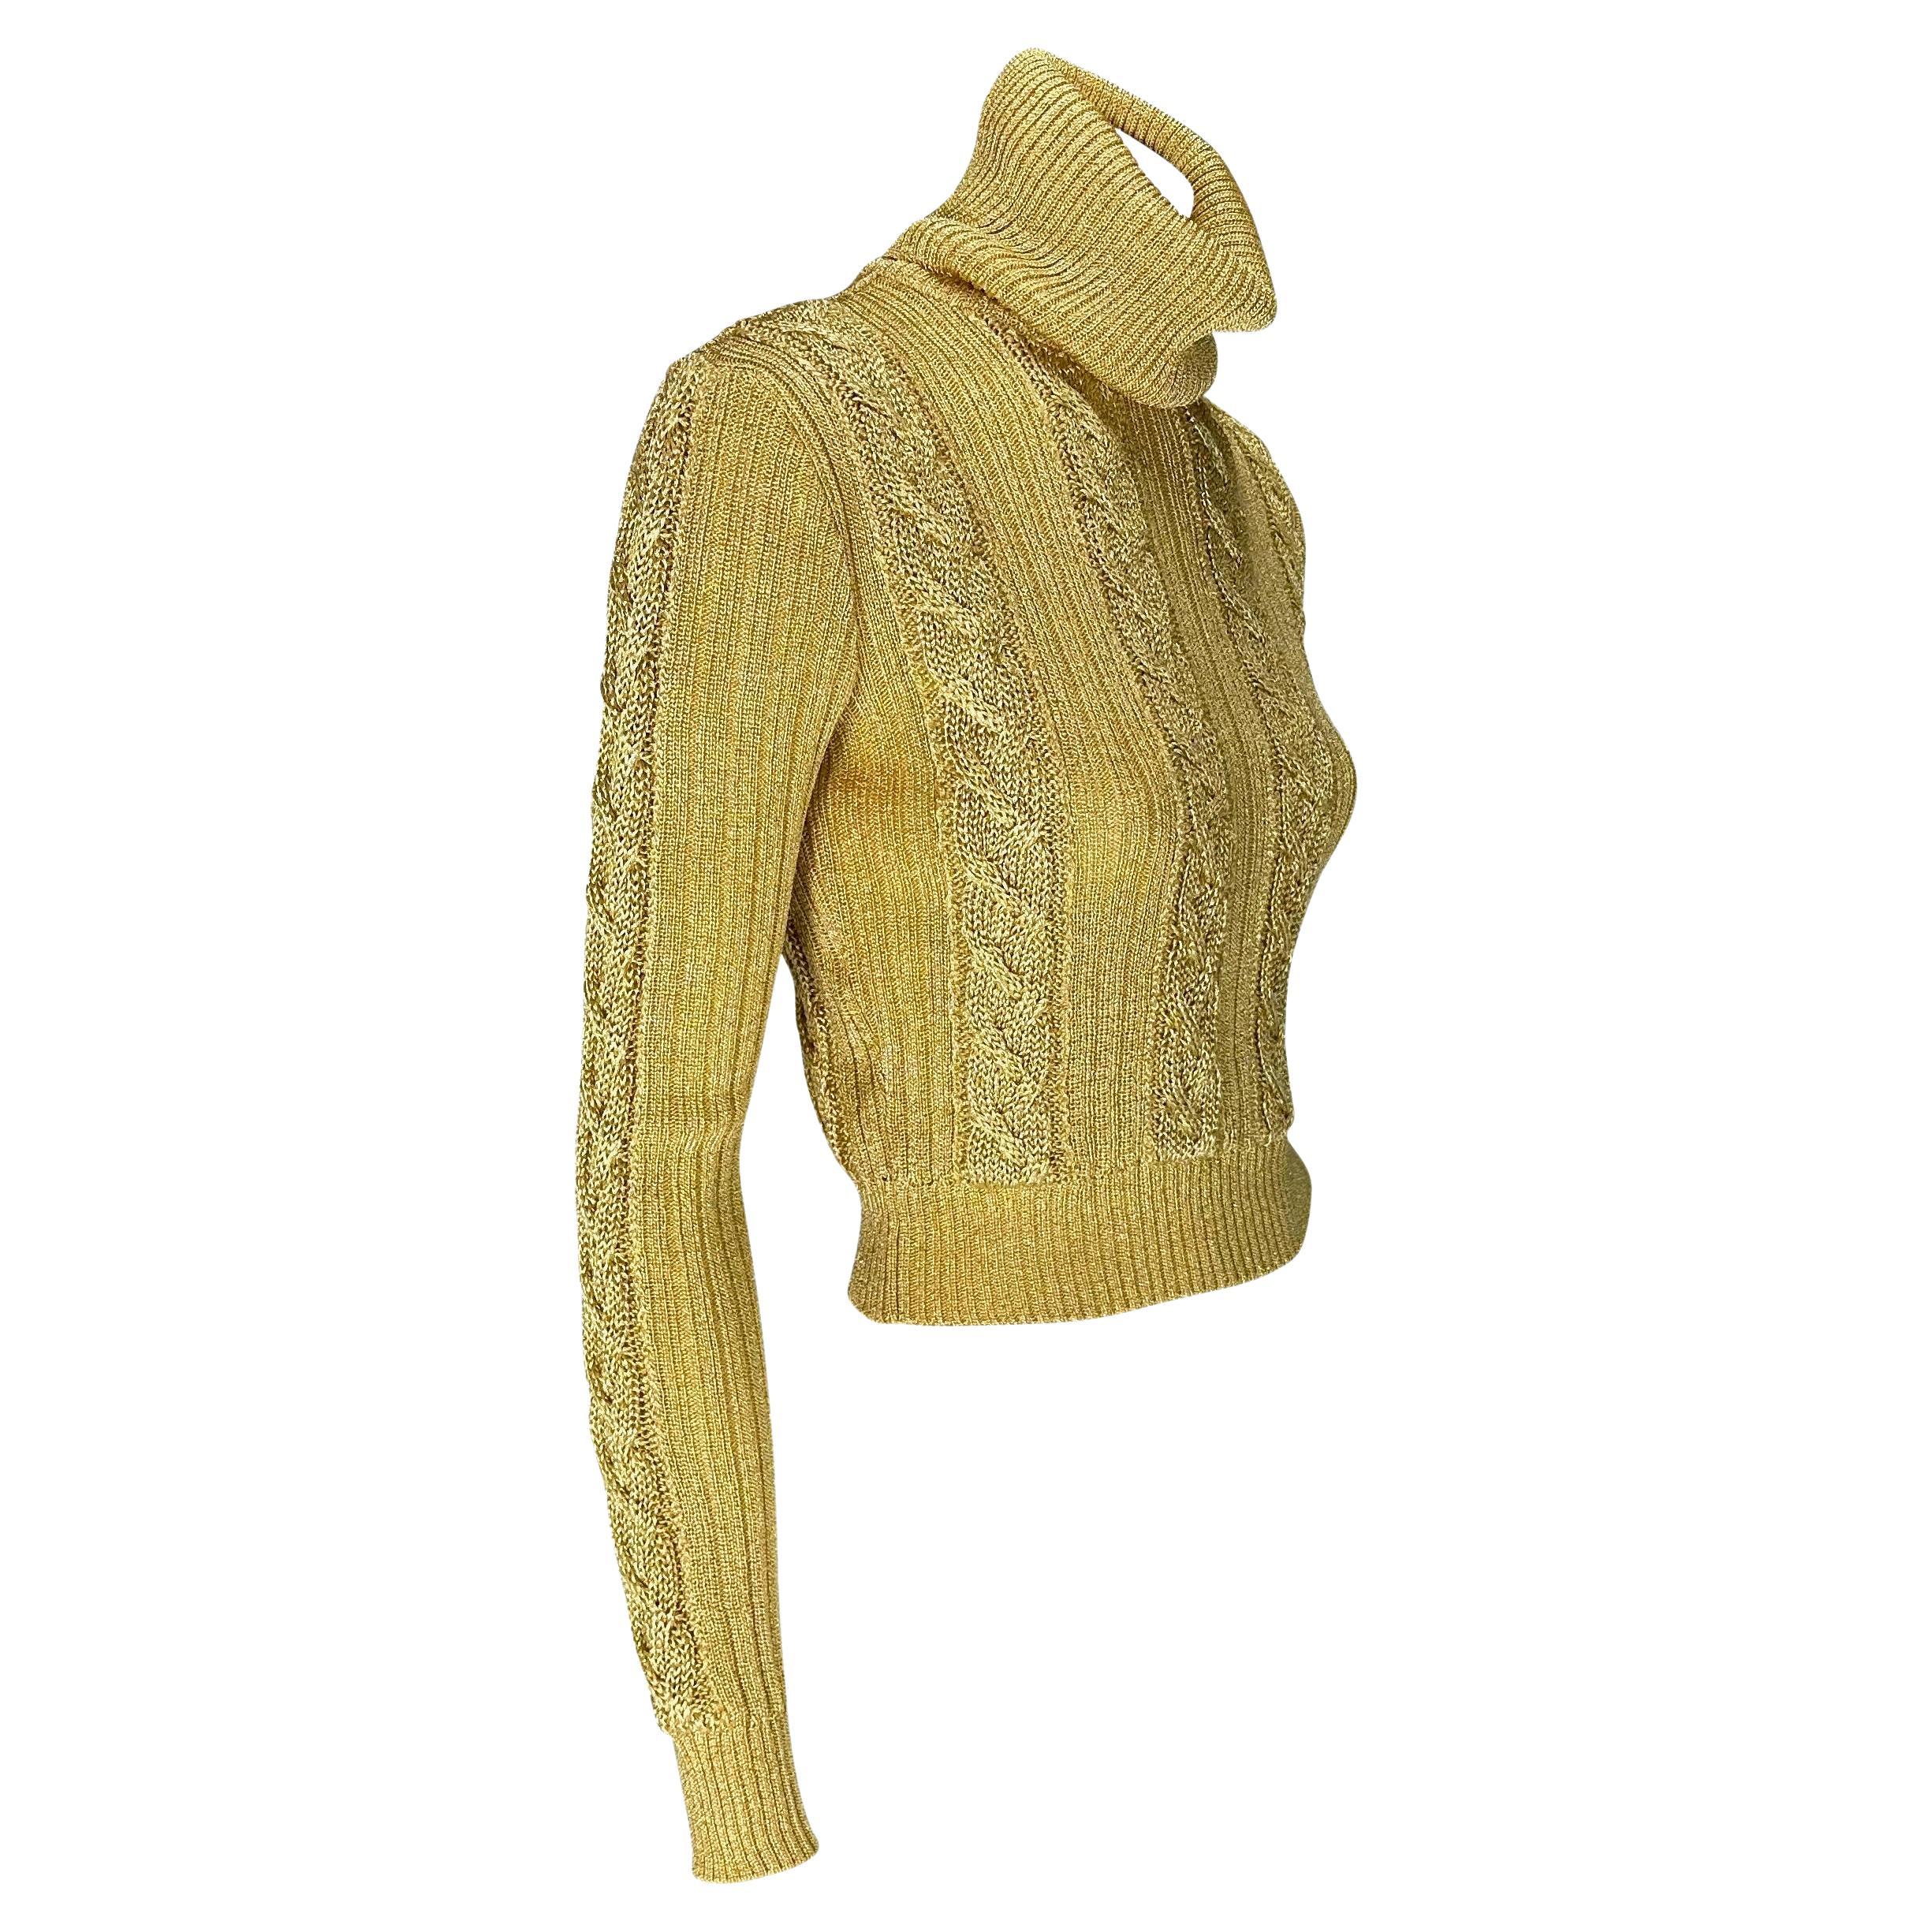 F/W 1994 Gianni Versace Ad Runway Gold Metallic Cable Knit Turtleneck Sweater 3